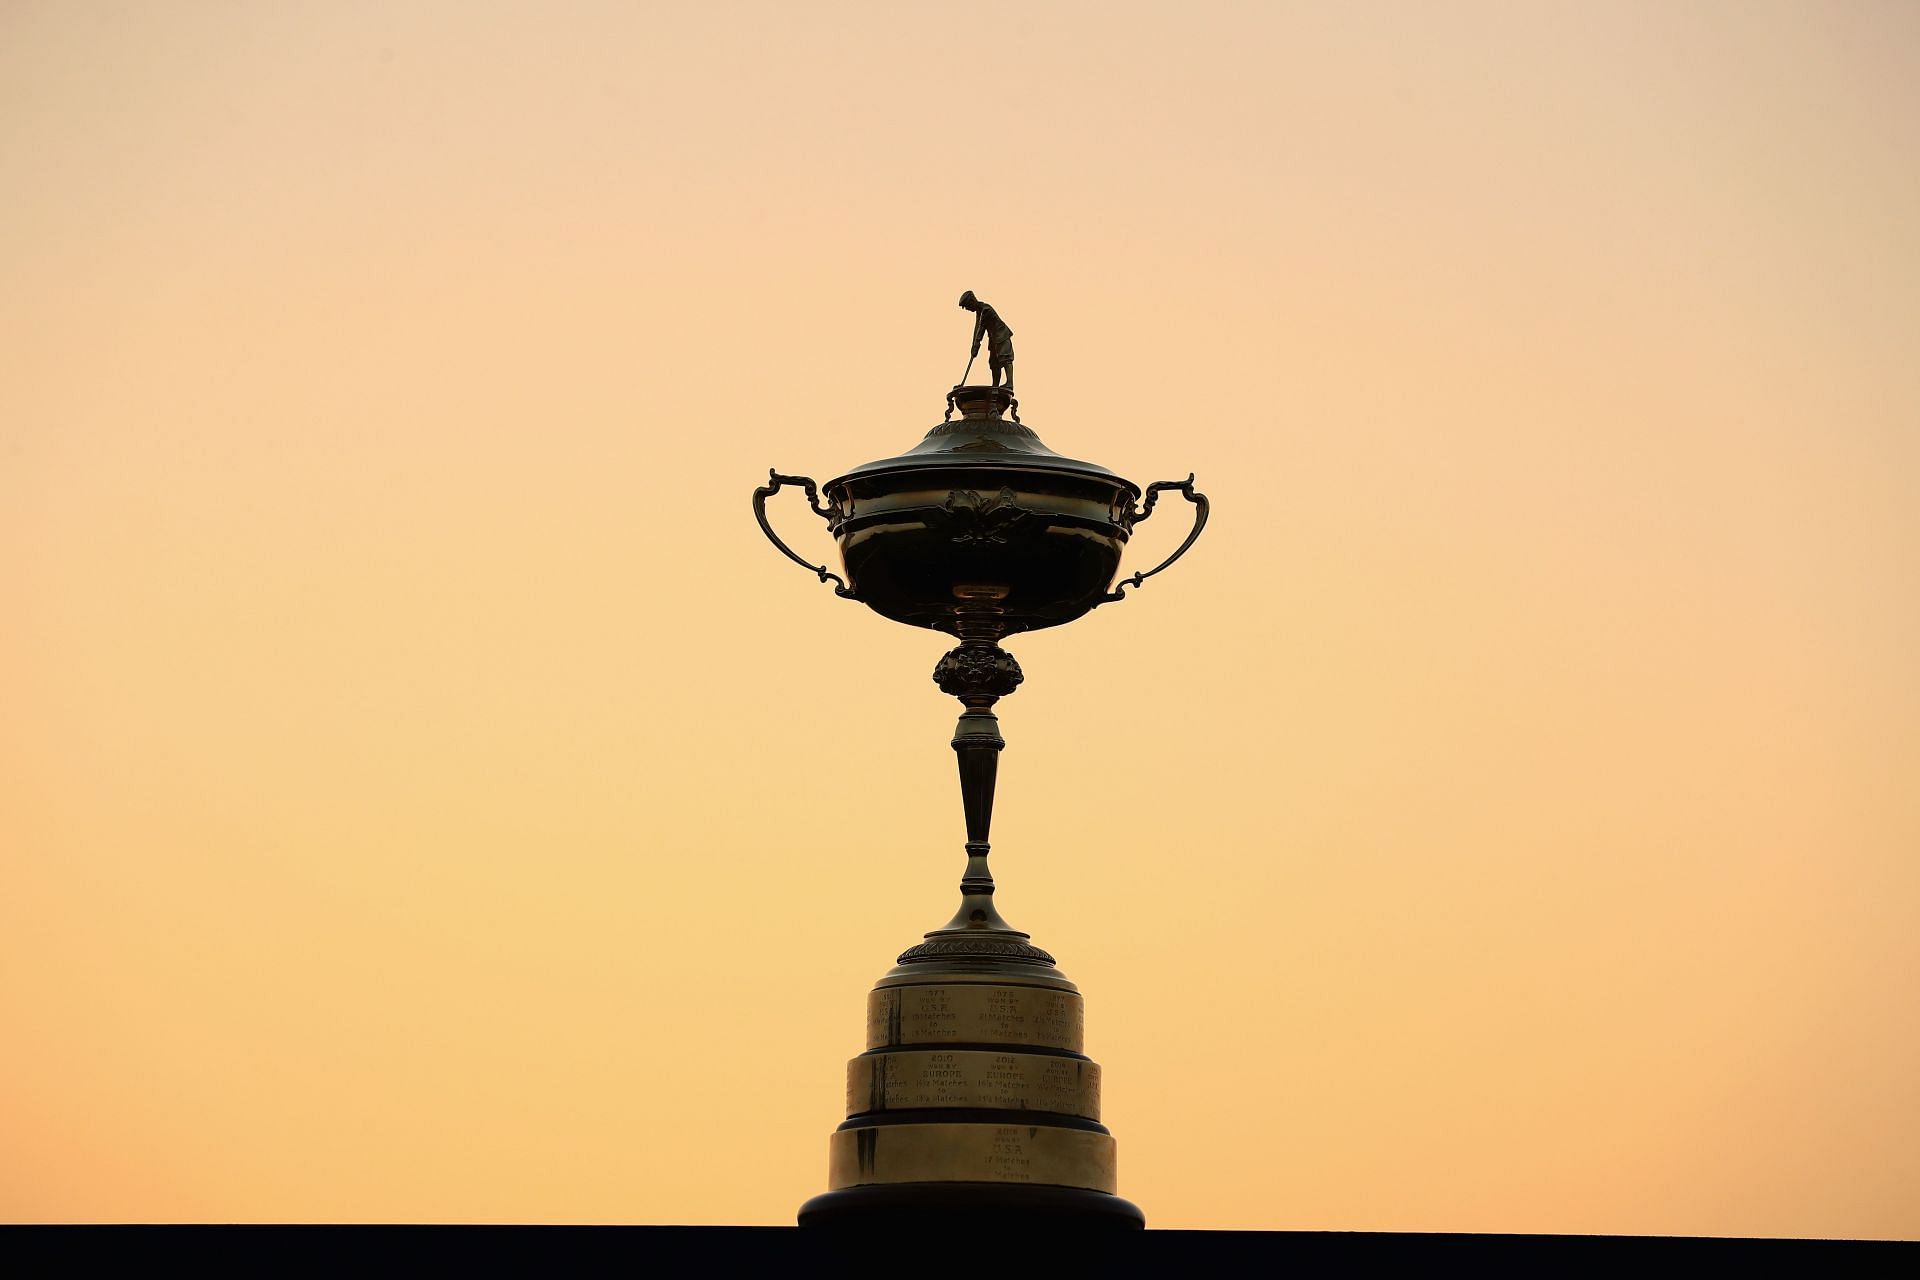 The Ryder Cup will be played in Italy for the first time